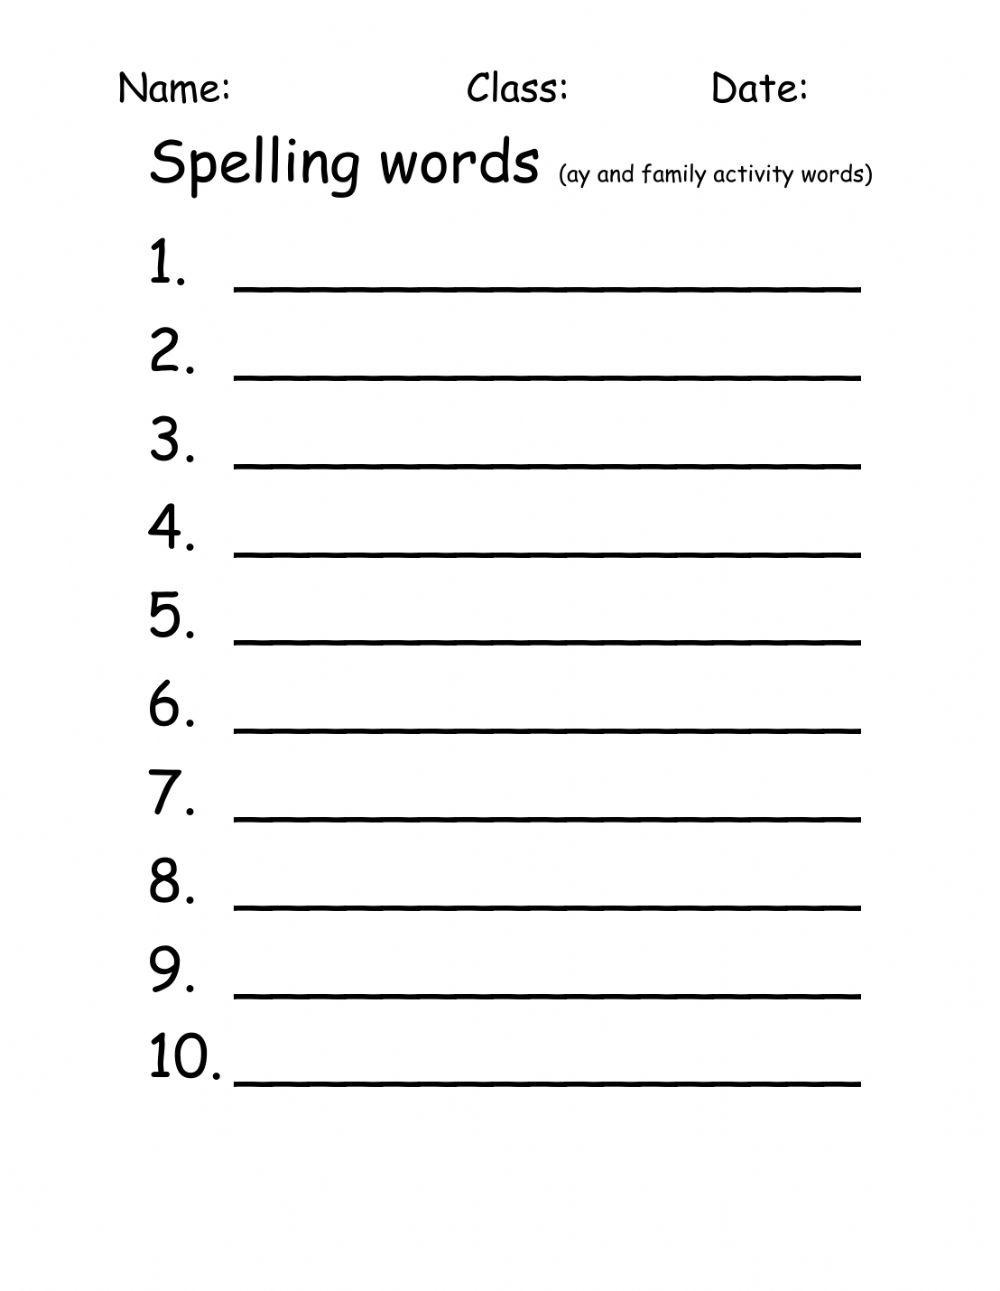 Spelling test ay and family activity words